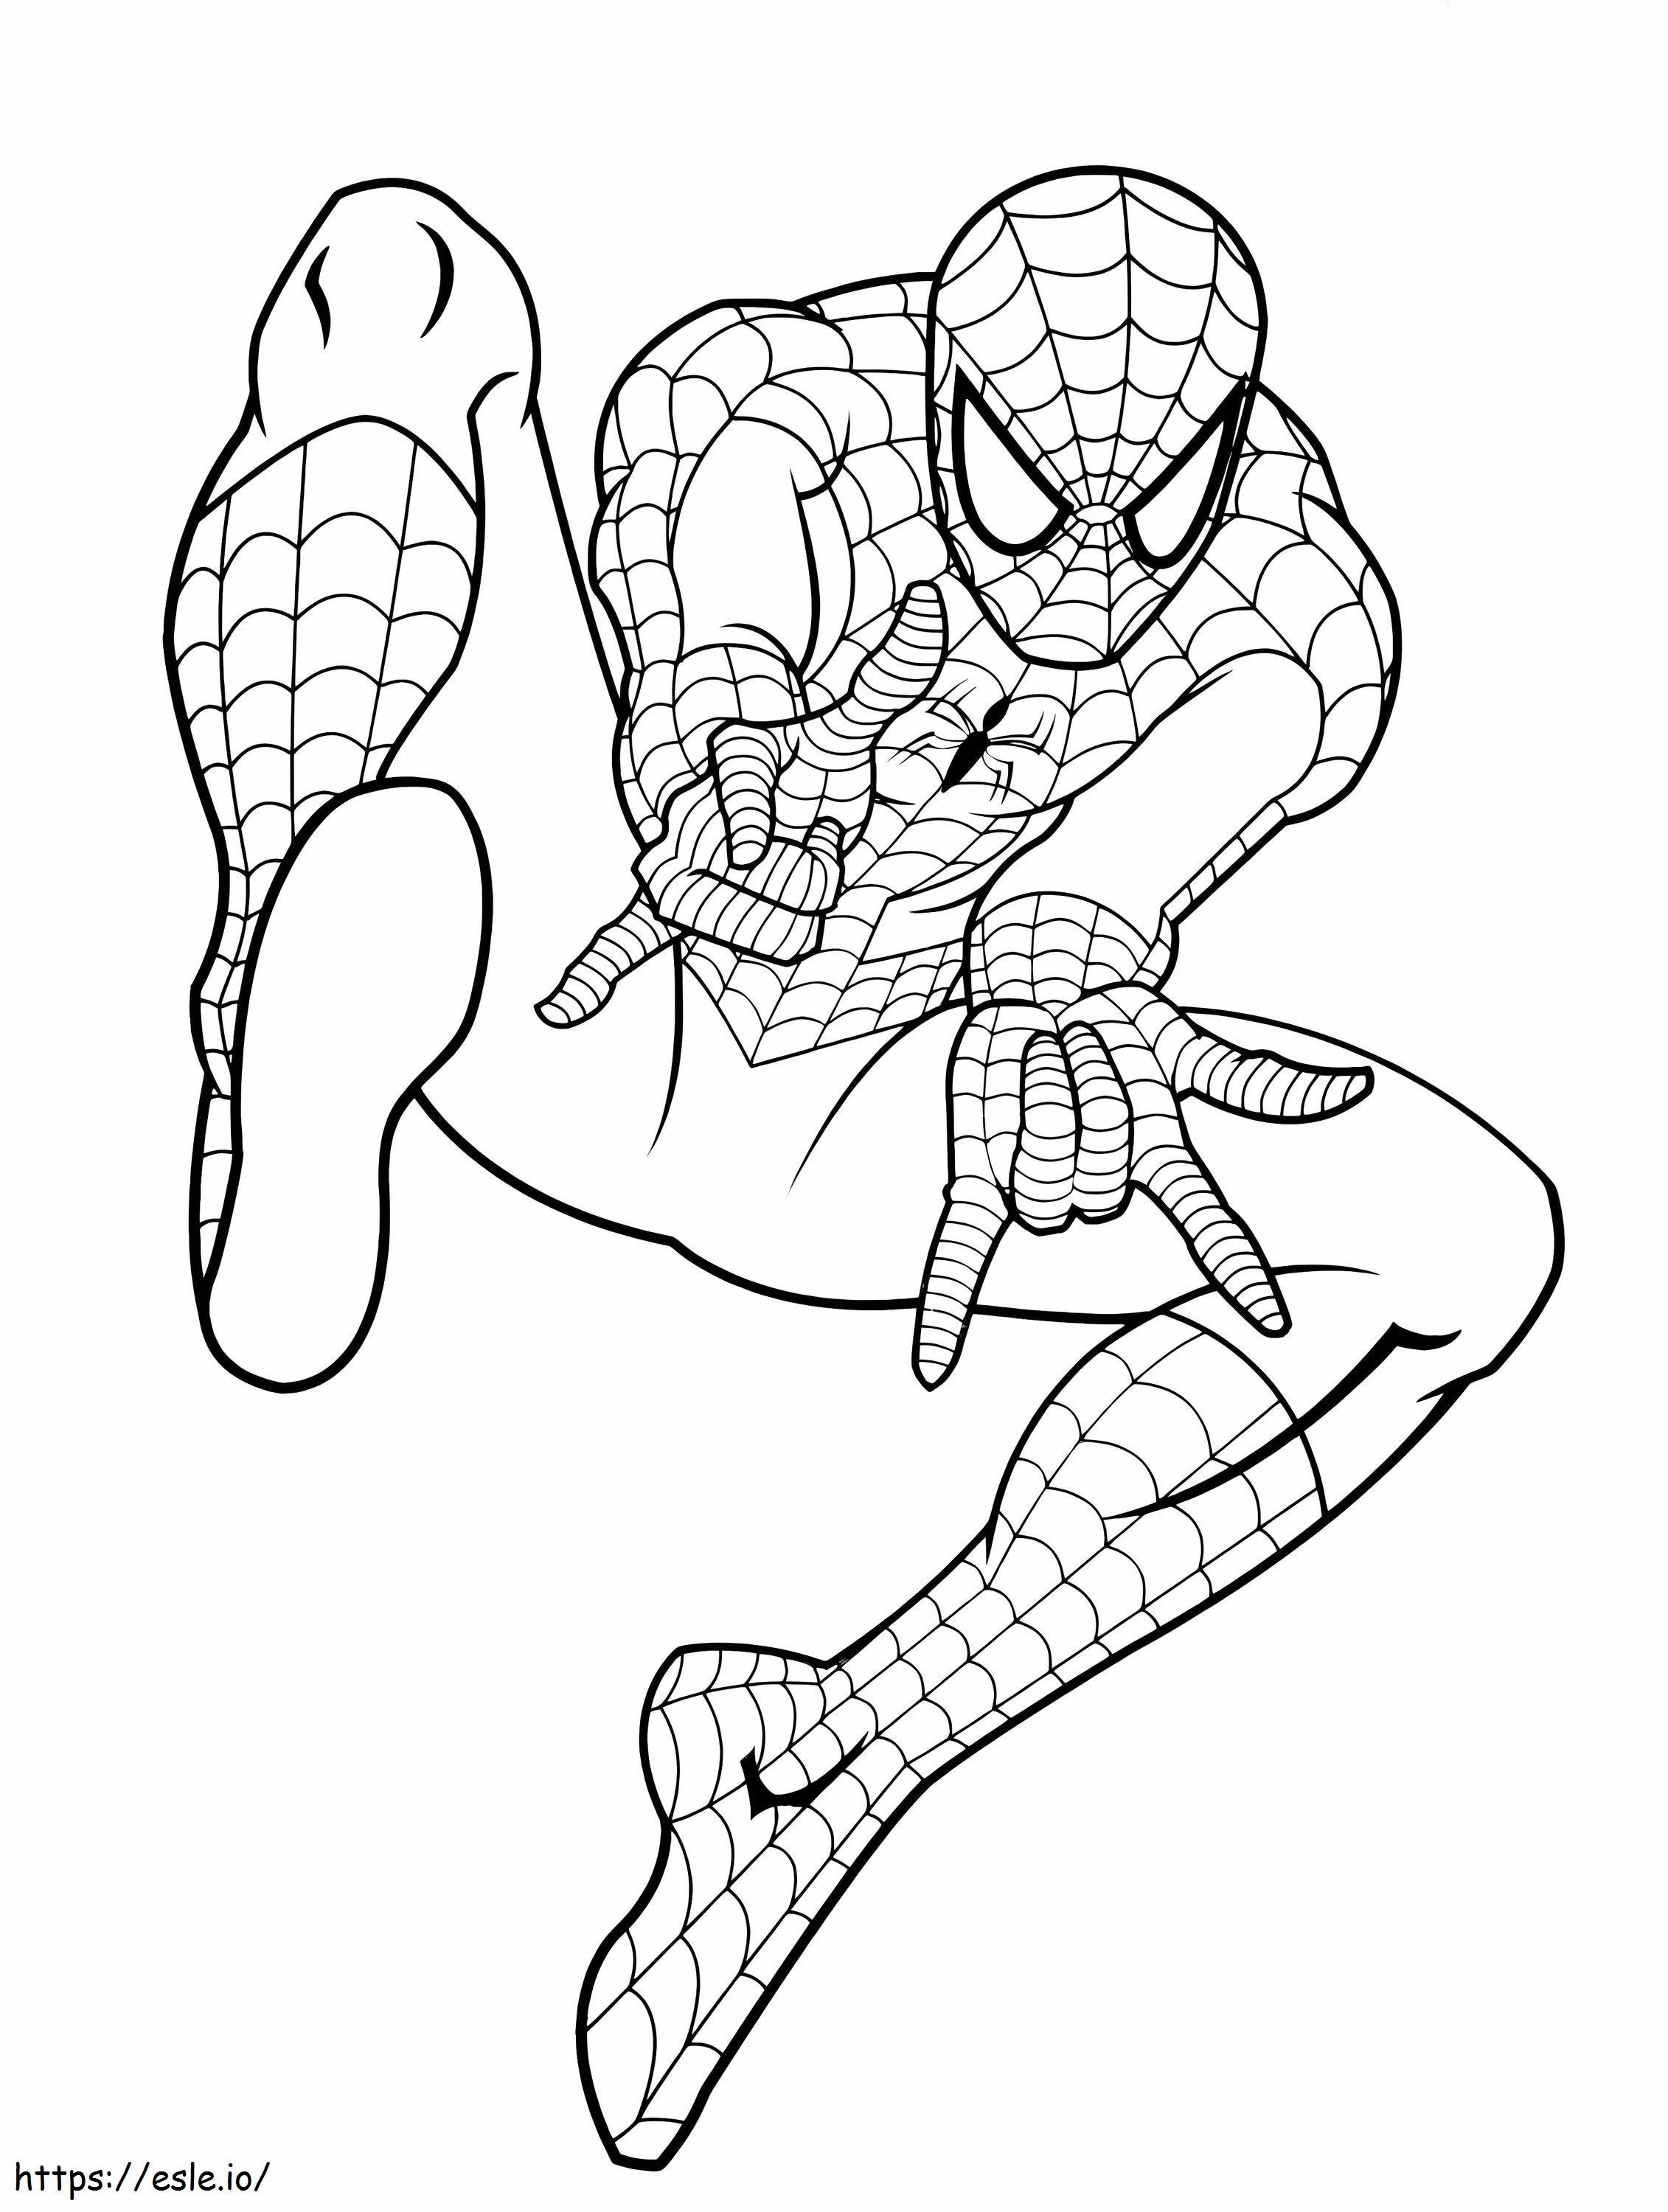 Spiderman 7 coloring page